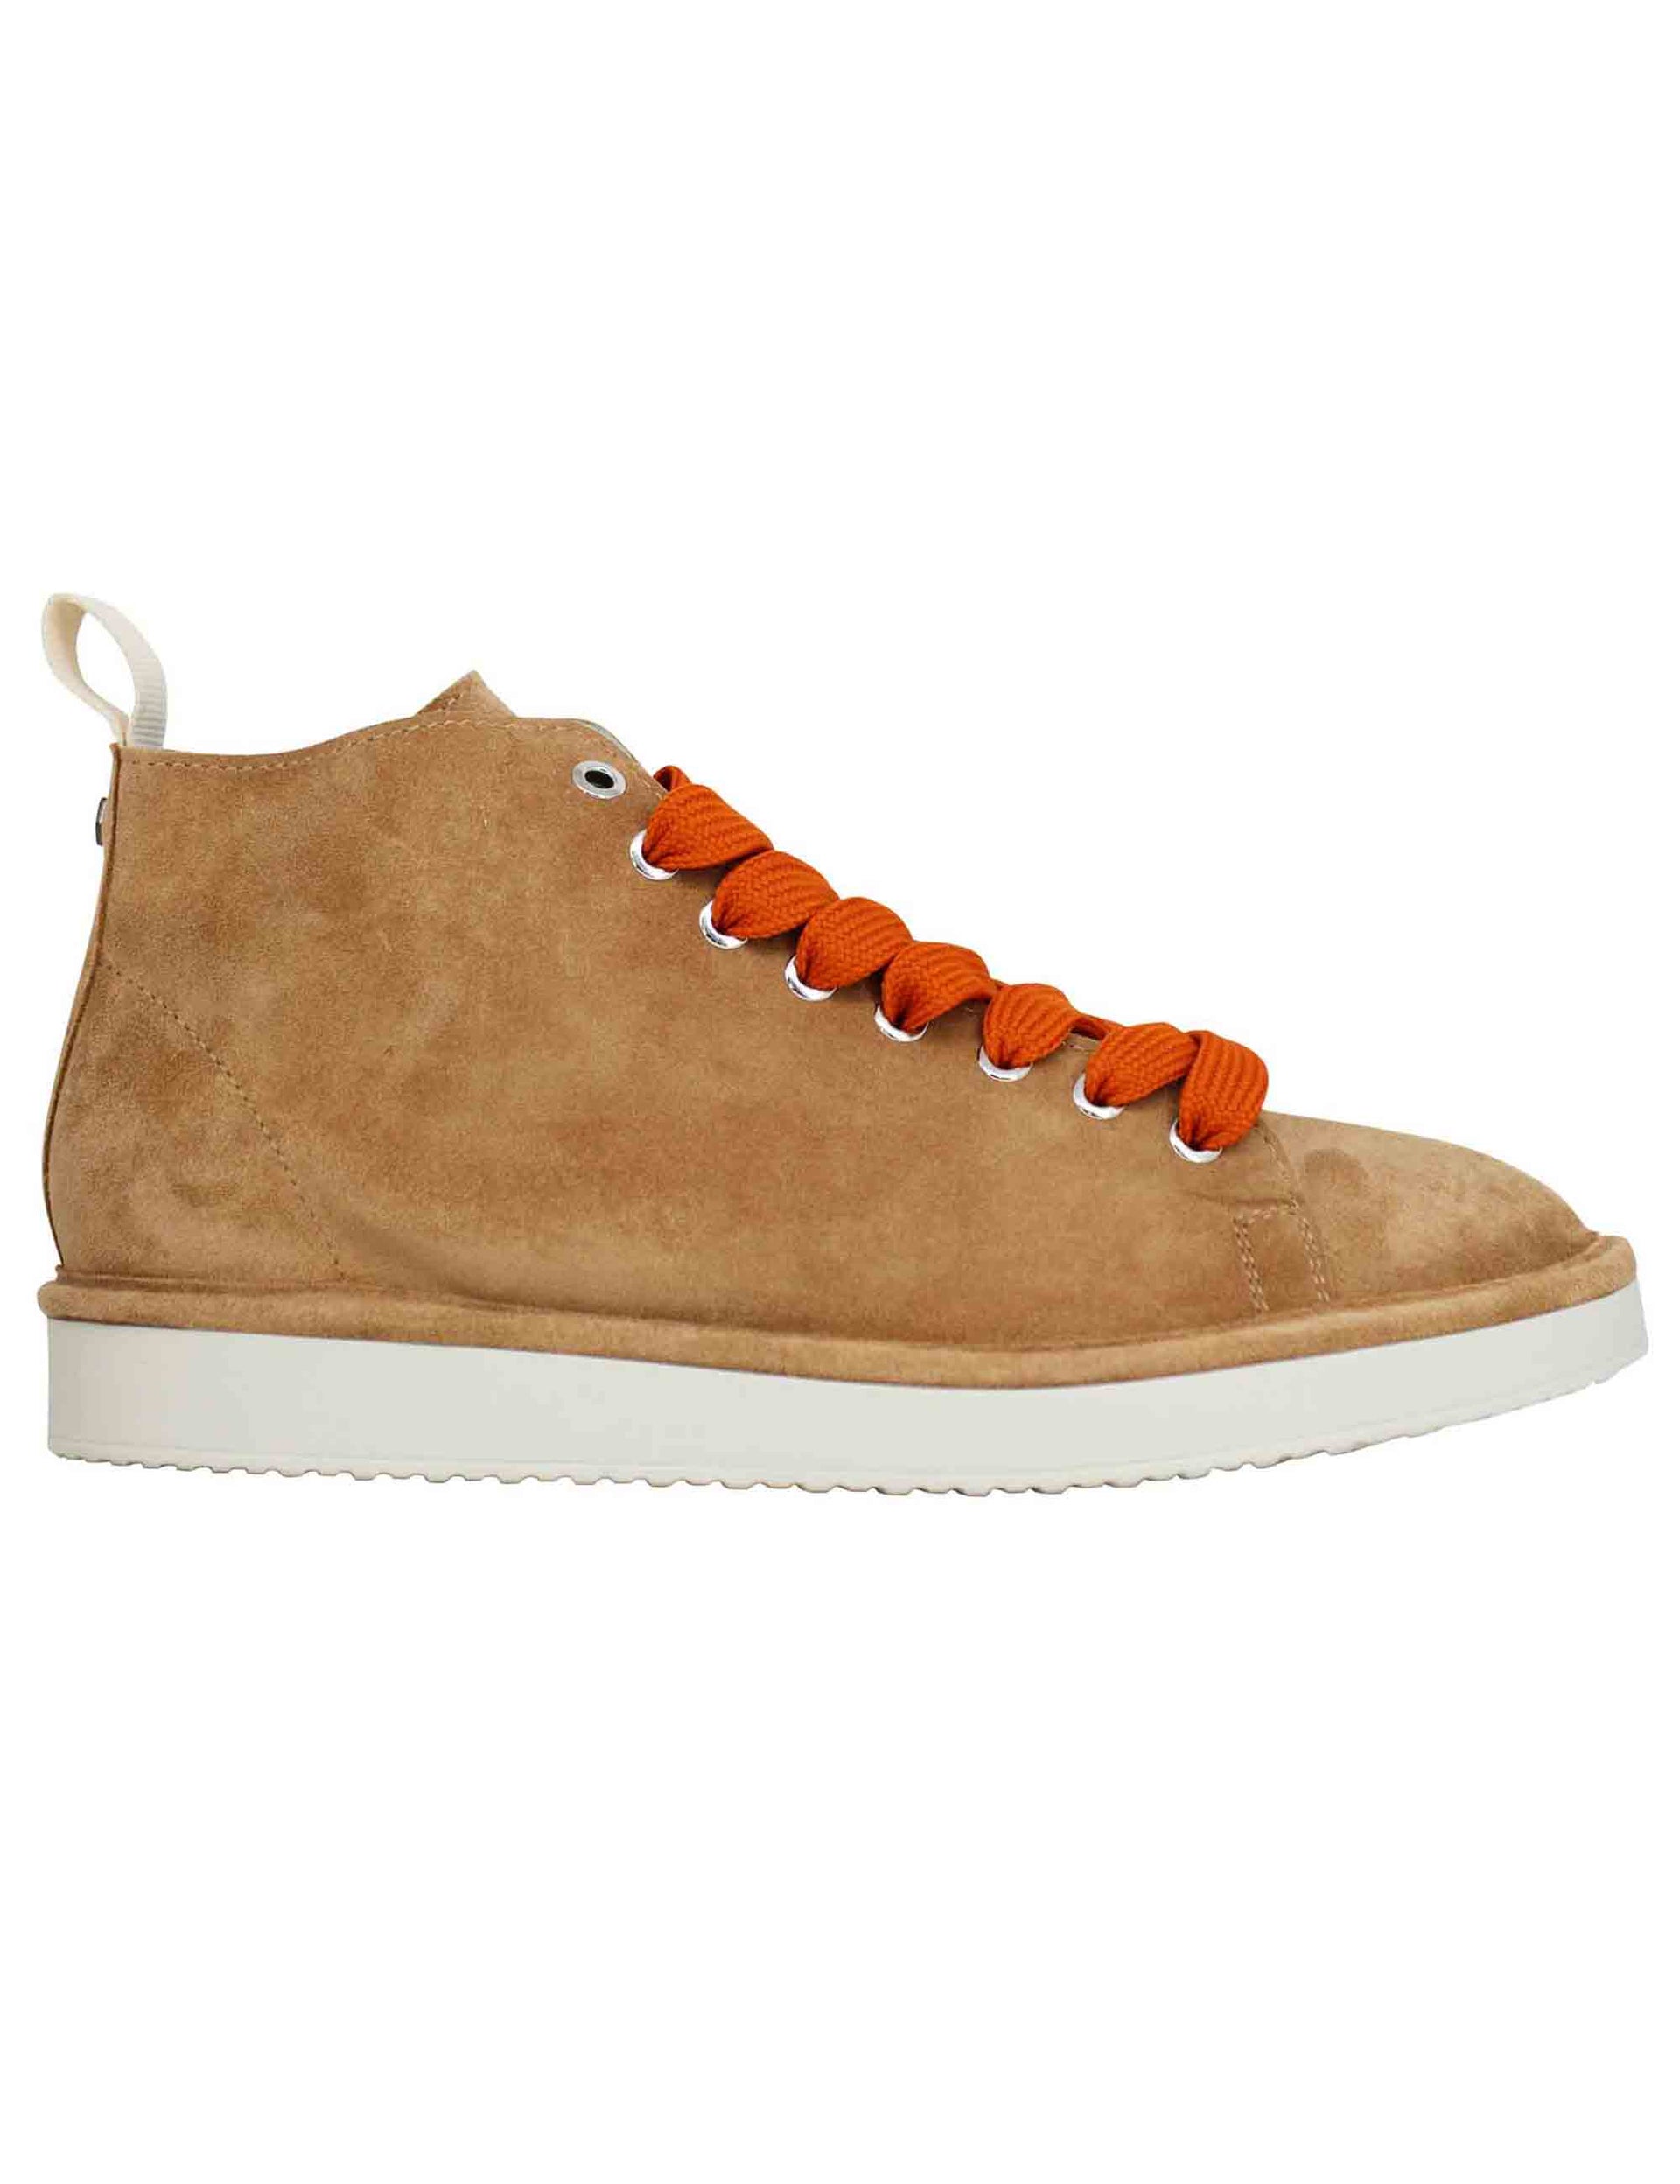 Men's sneakers in leather suede